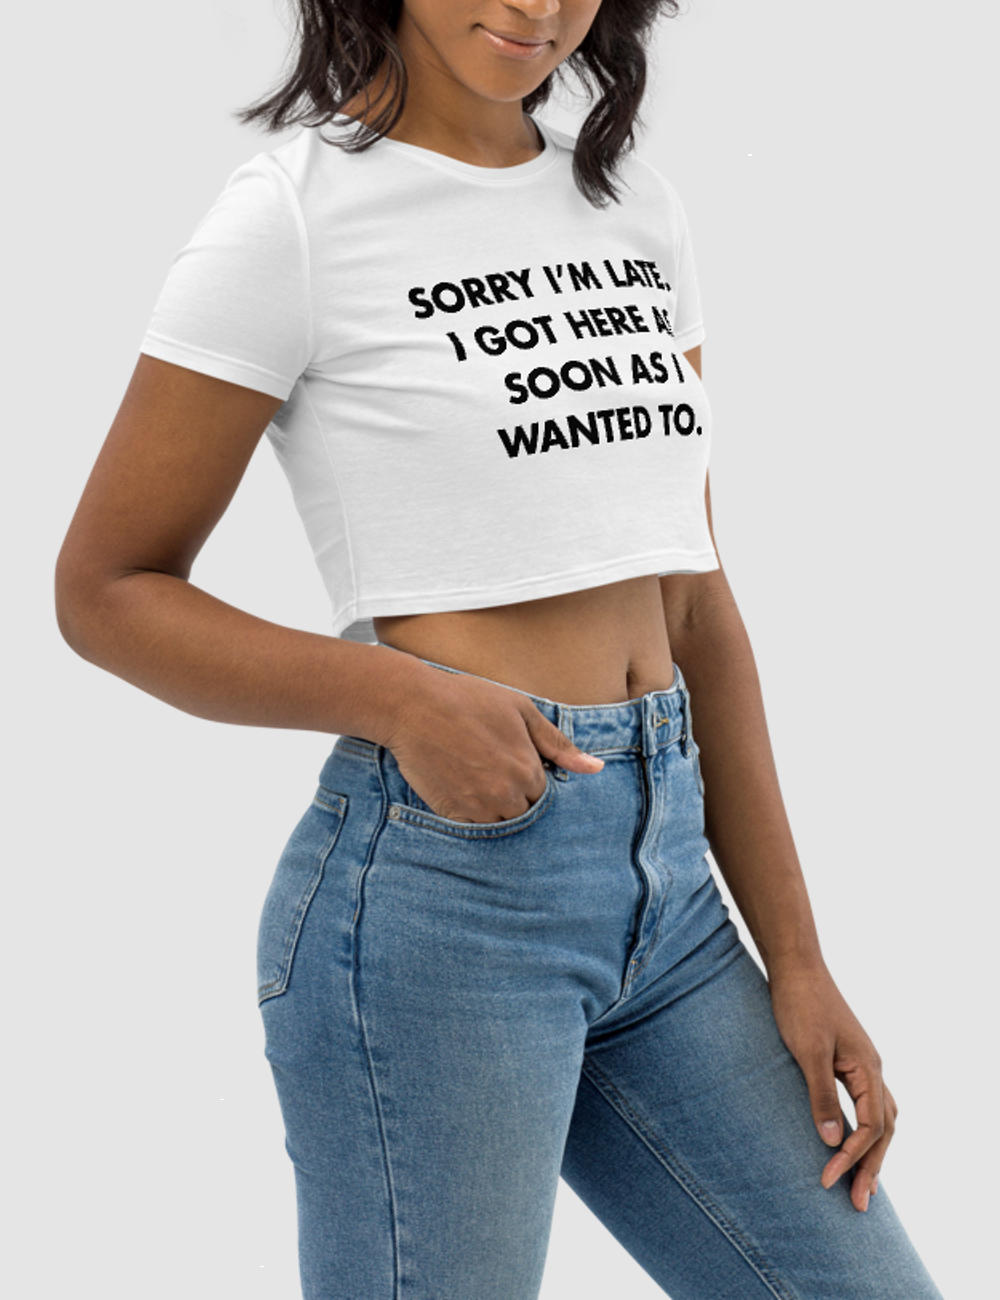 Sorry I'm Late I Got Here As Soon As I Wanted To Women's Fitted Crop Top T-Shirt OniTakai